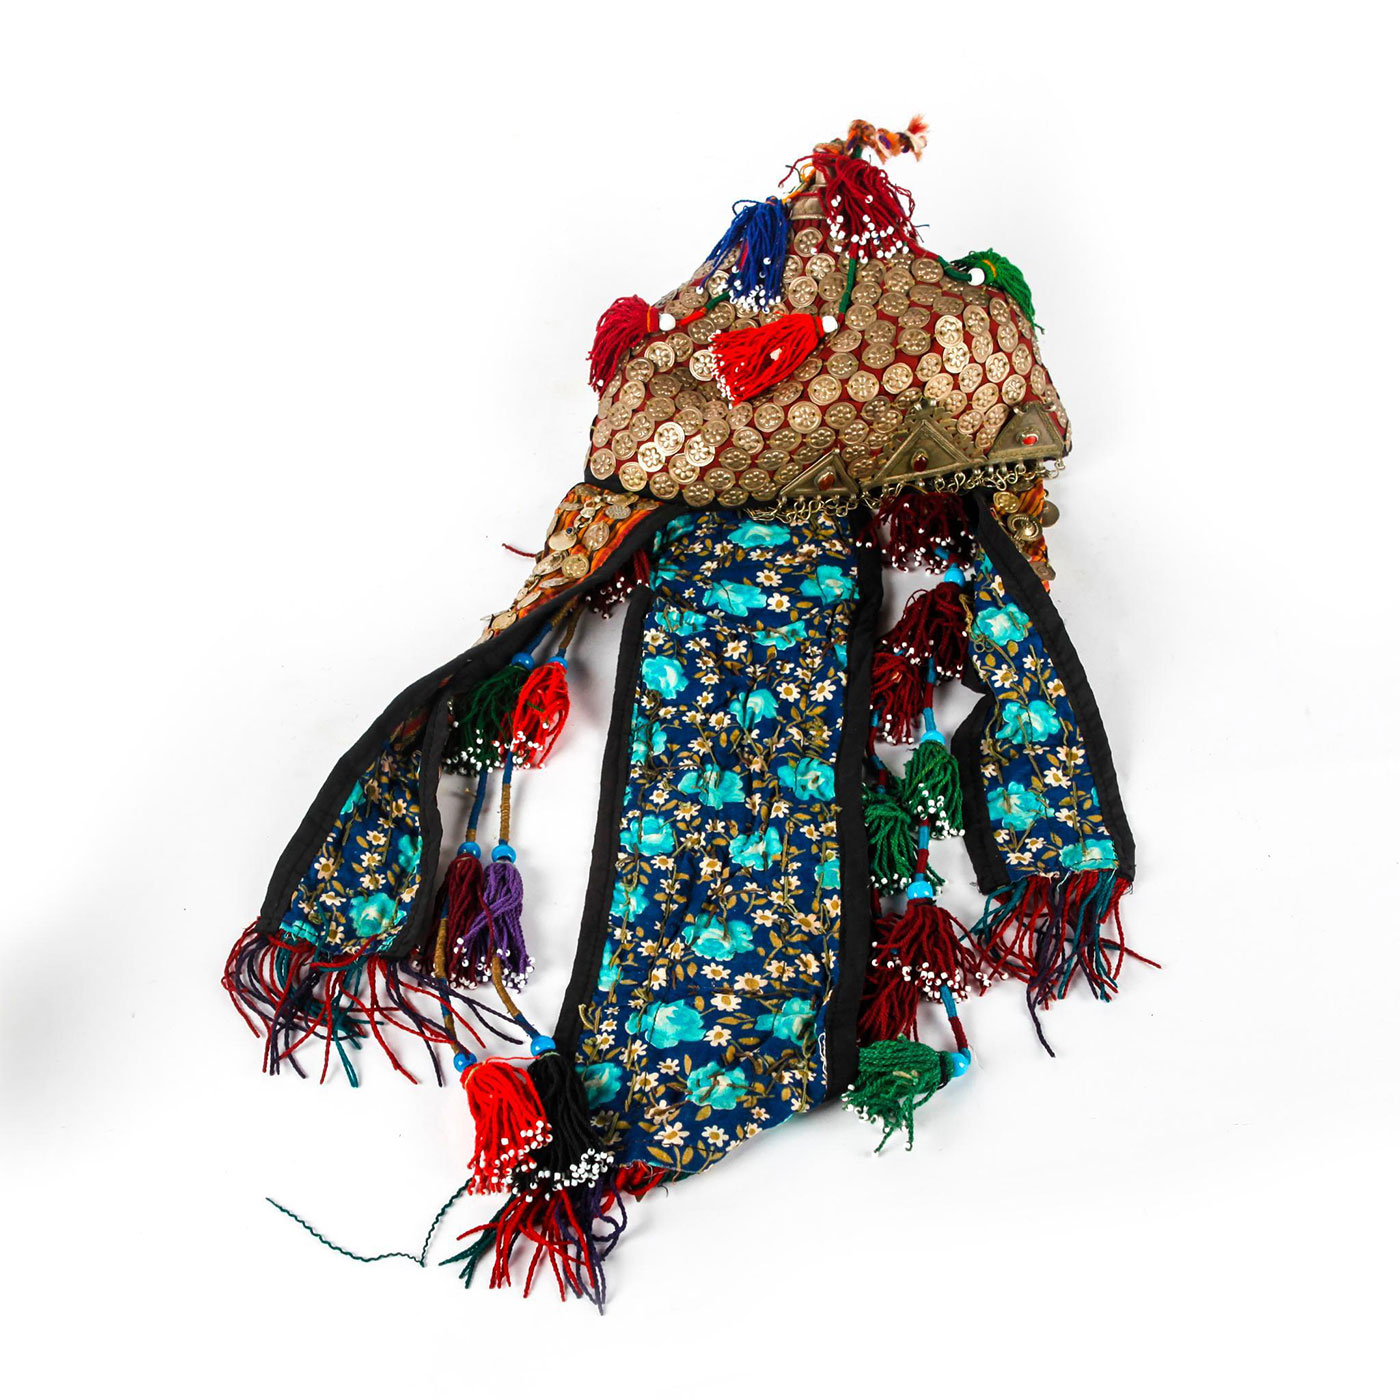 TURKMENISTANI ELABORATE HAND SEWN HEADDRESS WITH COINS - Image 8 of 8